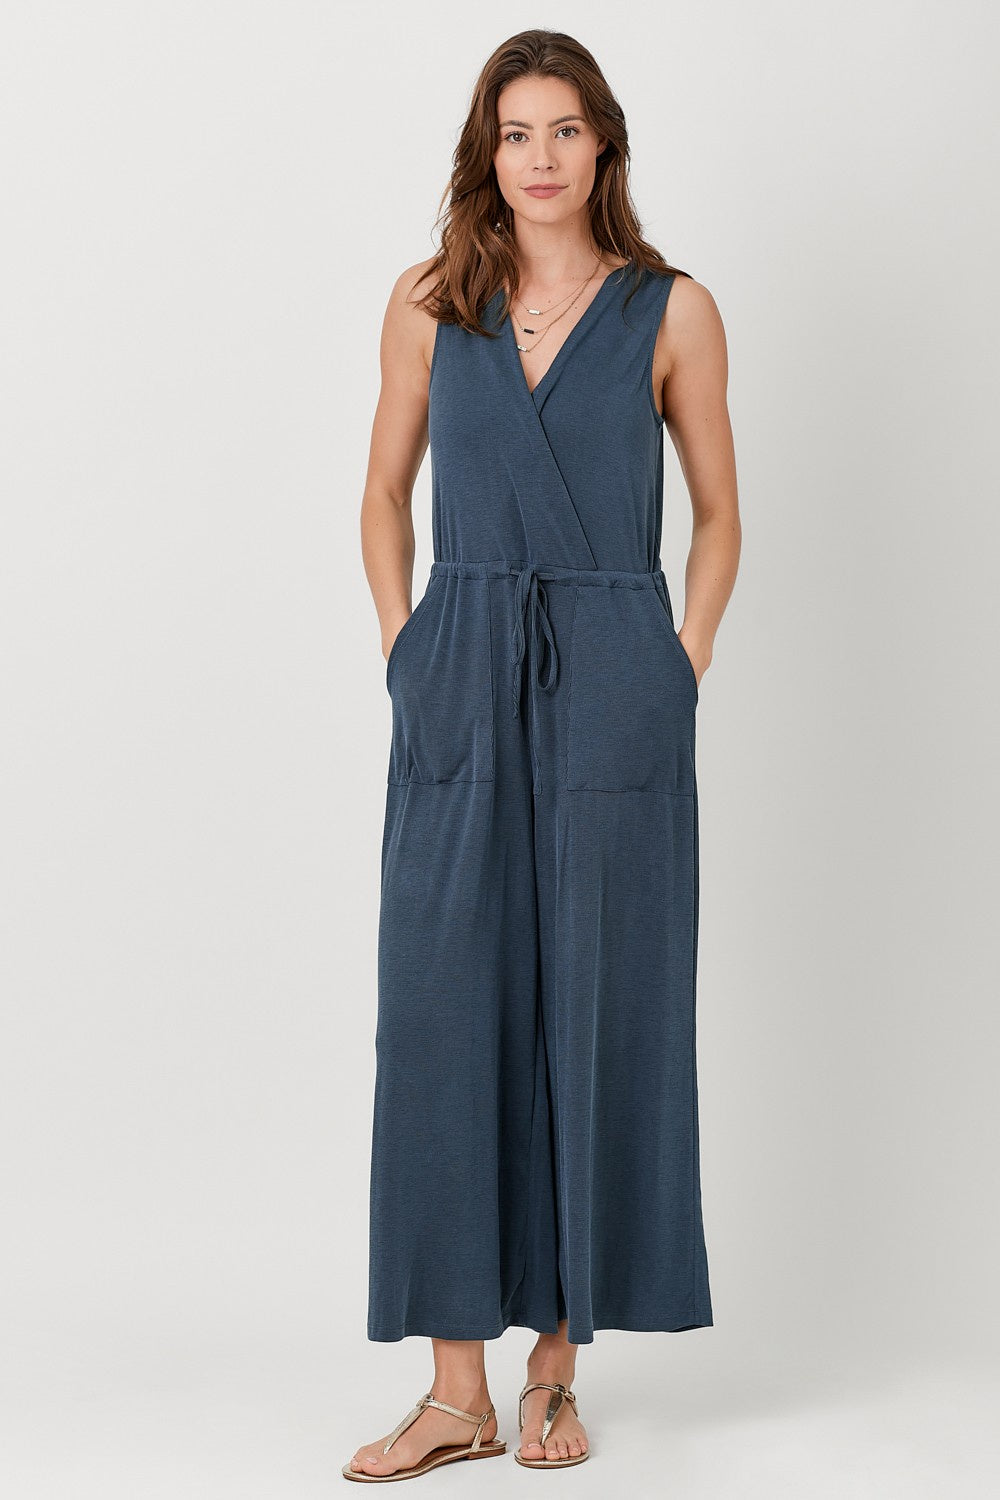 Modal Ribbed Jumpsuit in Navy by Mystree